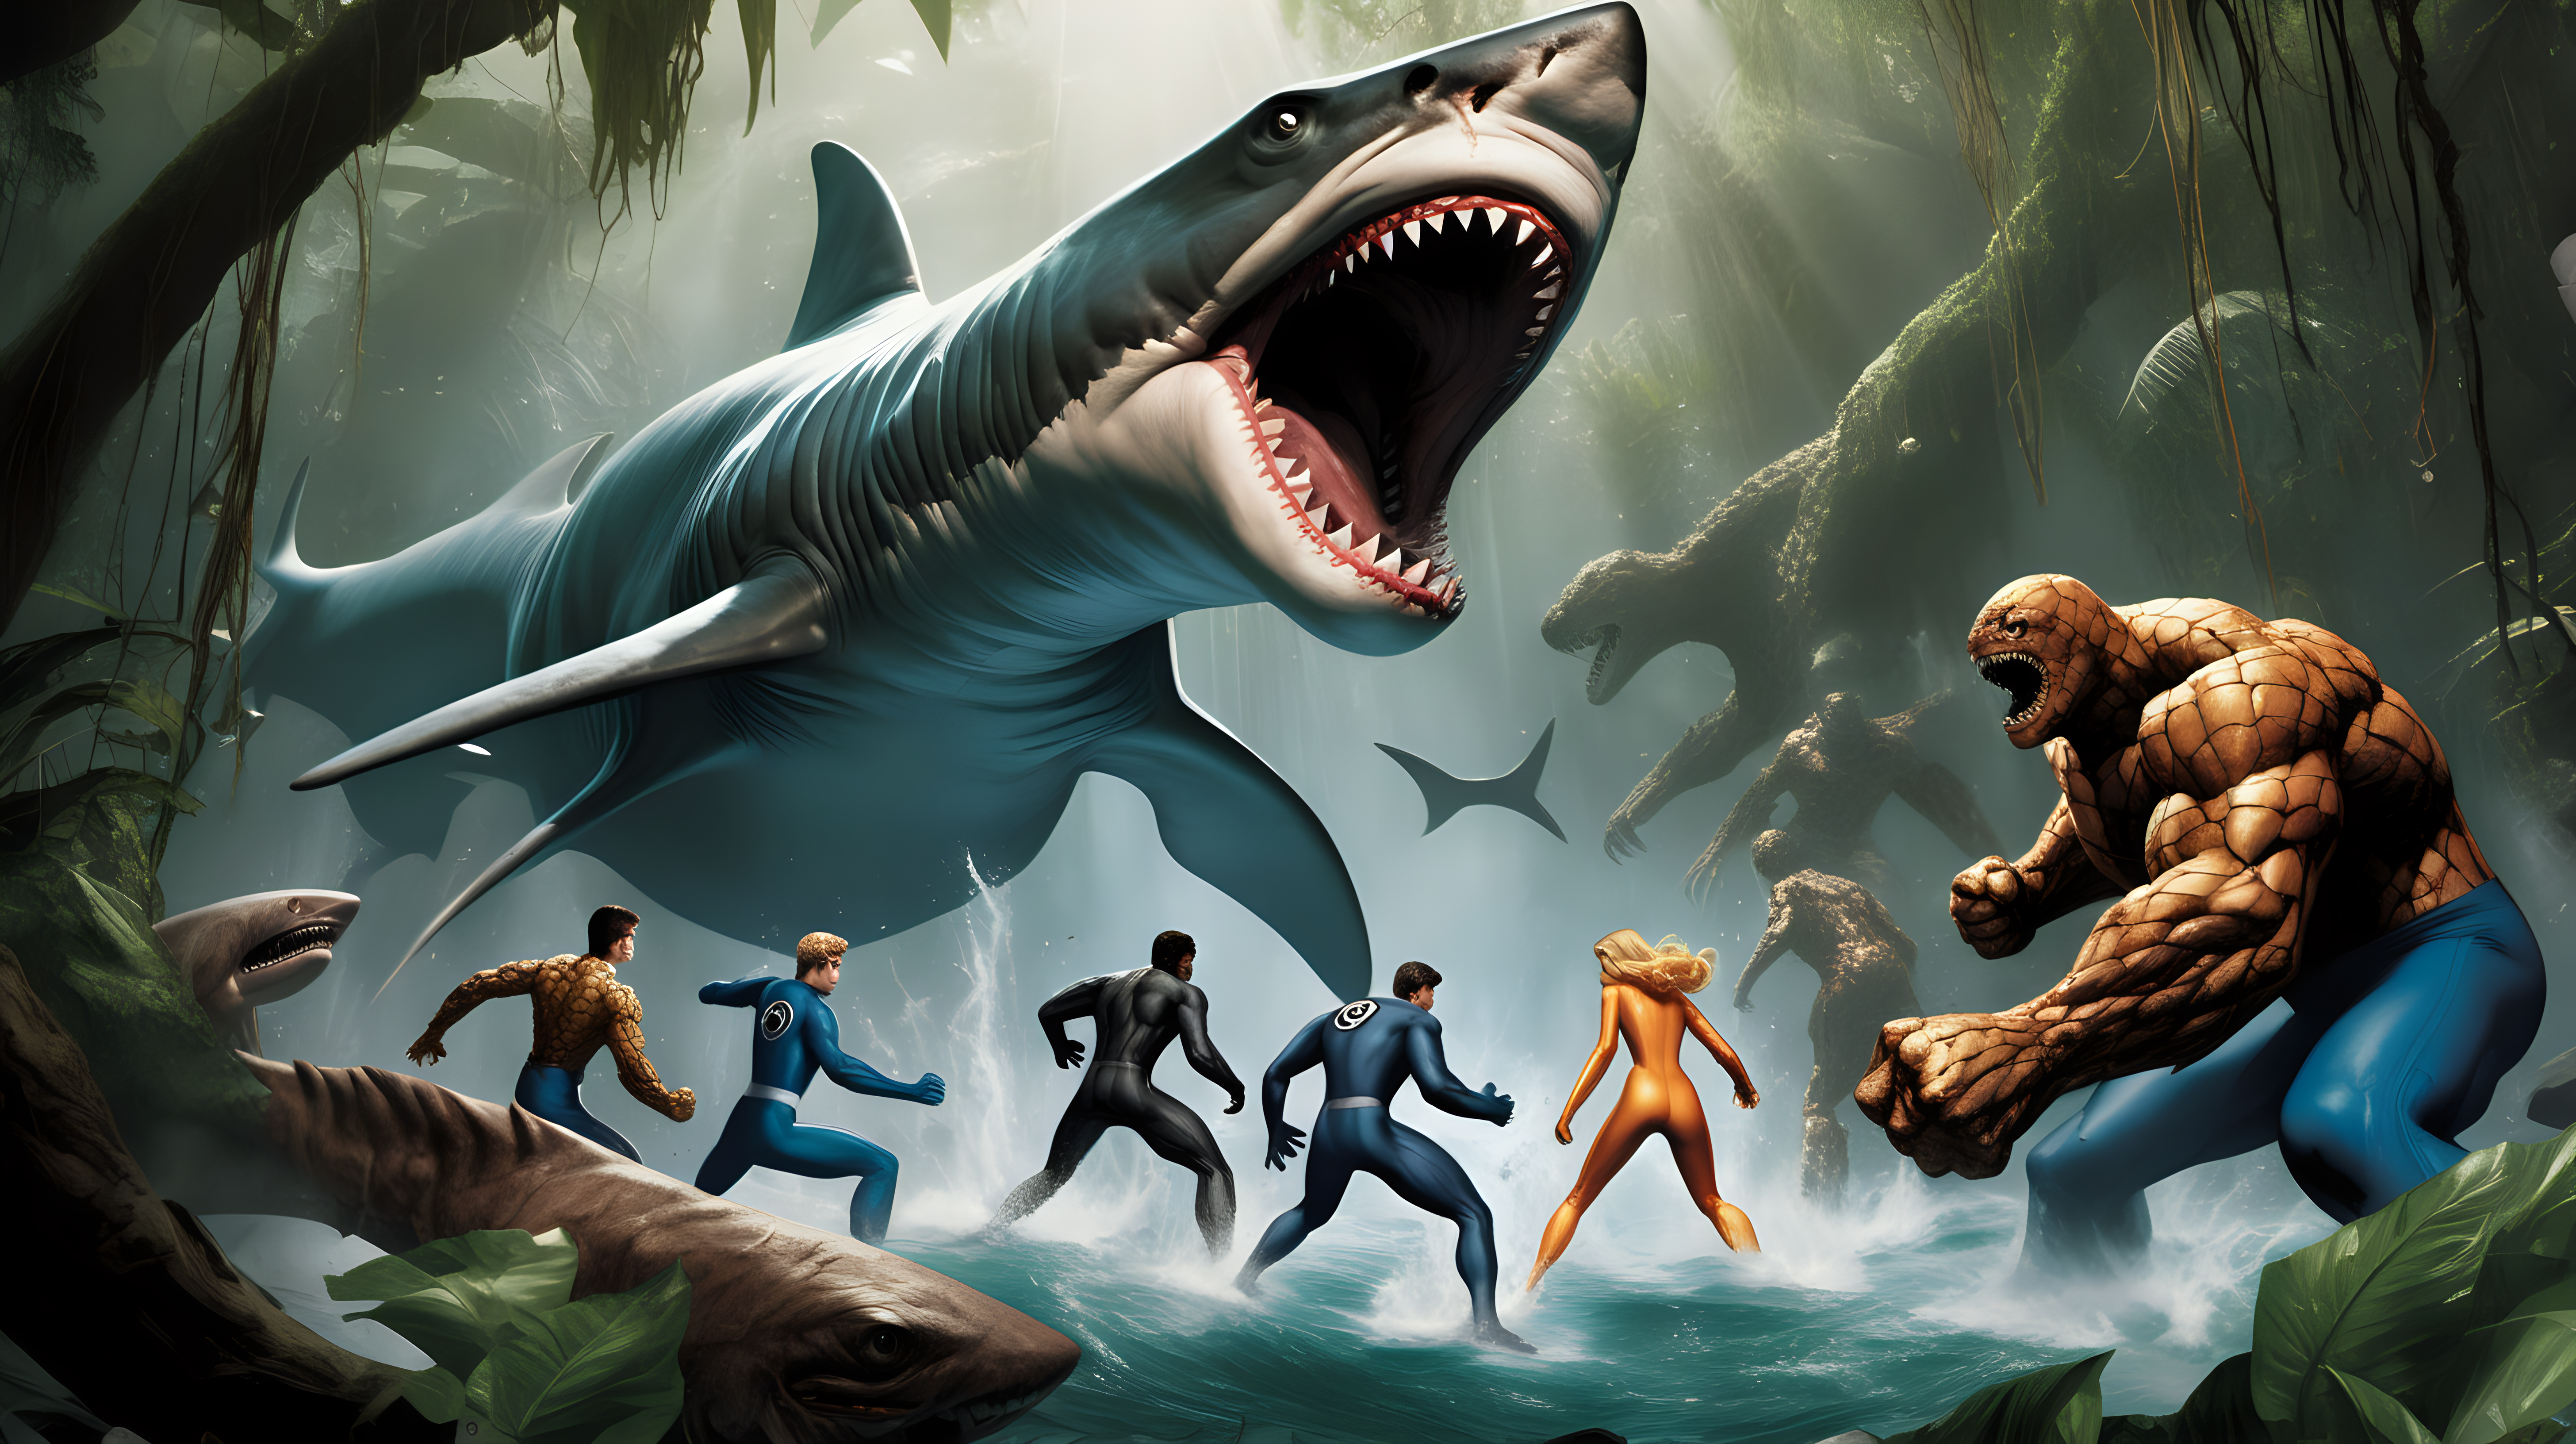 The Fantastic Four fights a giant shark with legs and wings in the jungle